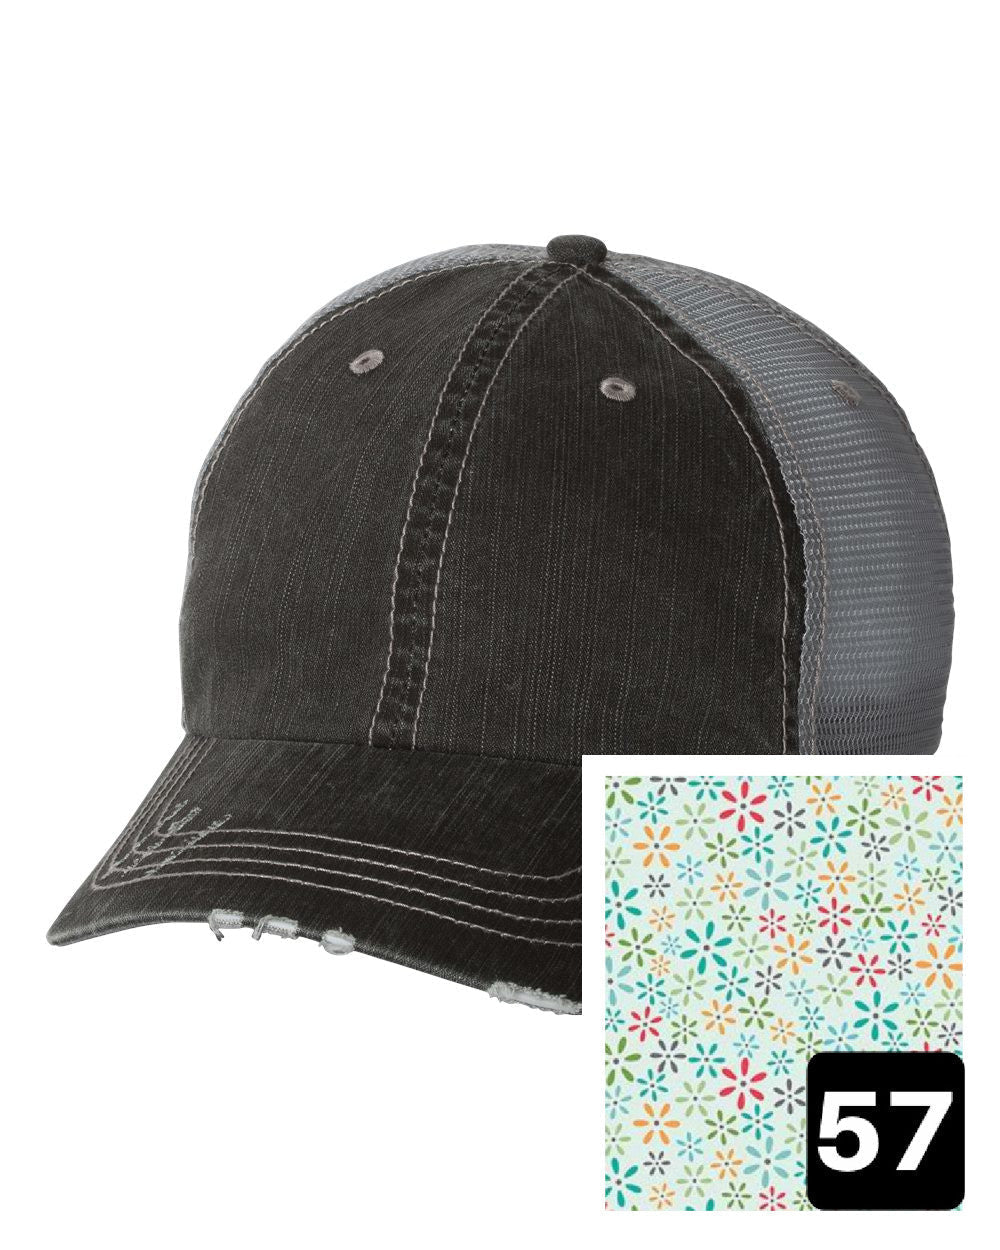 gray distressed trucker hat with white daisy on yellow fabric state of Vermont